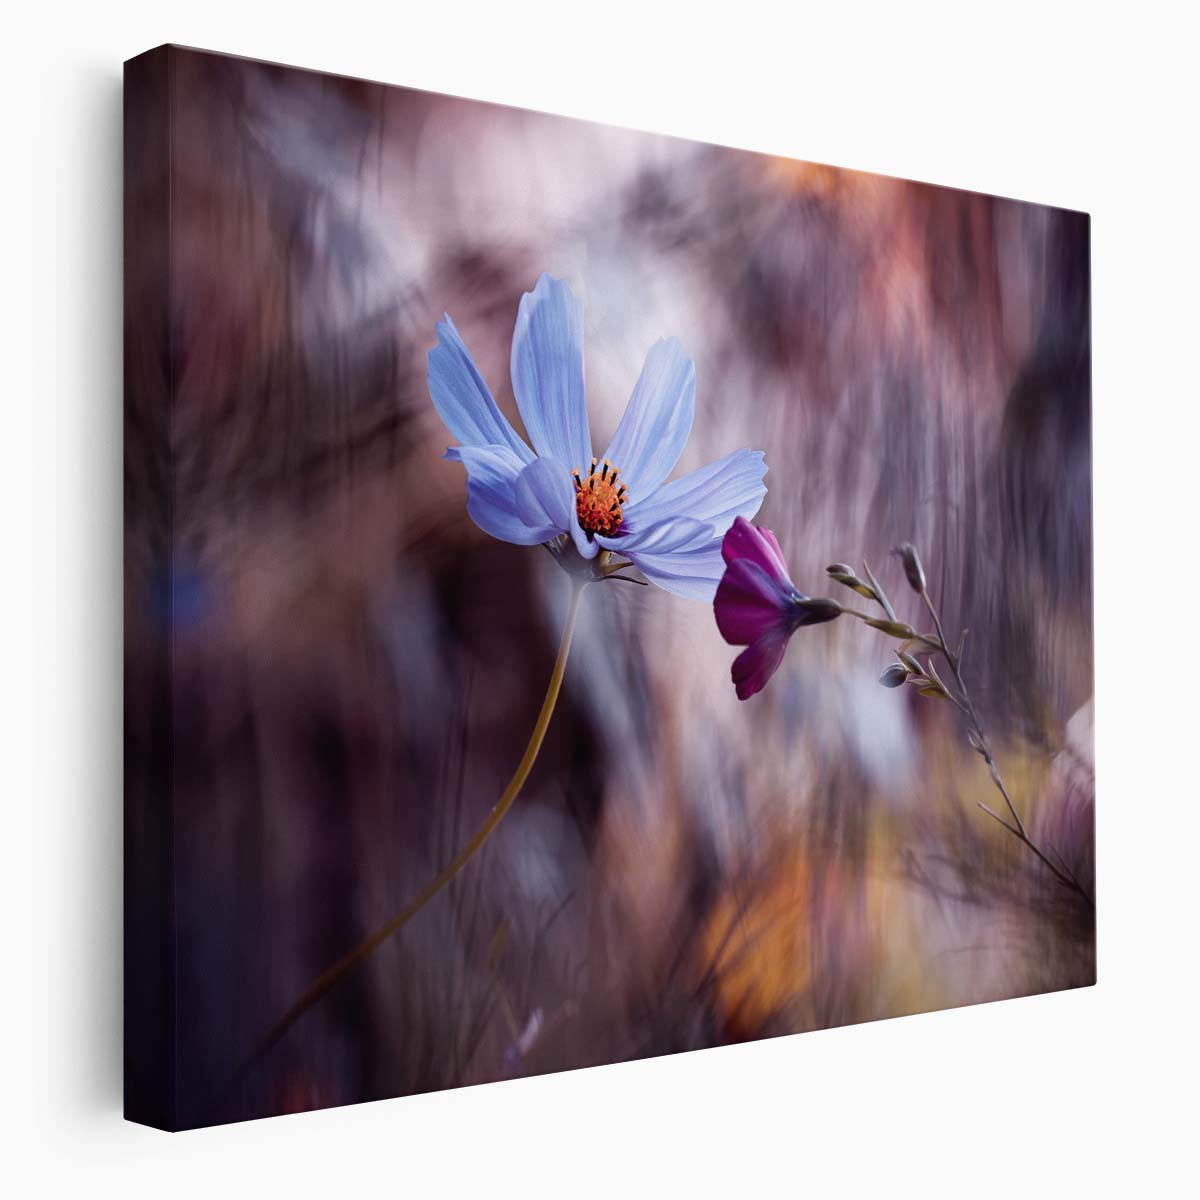 Romantic Cosmos Duo in Love Macro Wall Art by Luxuriance Designs. Made in USA.